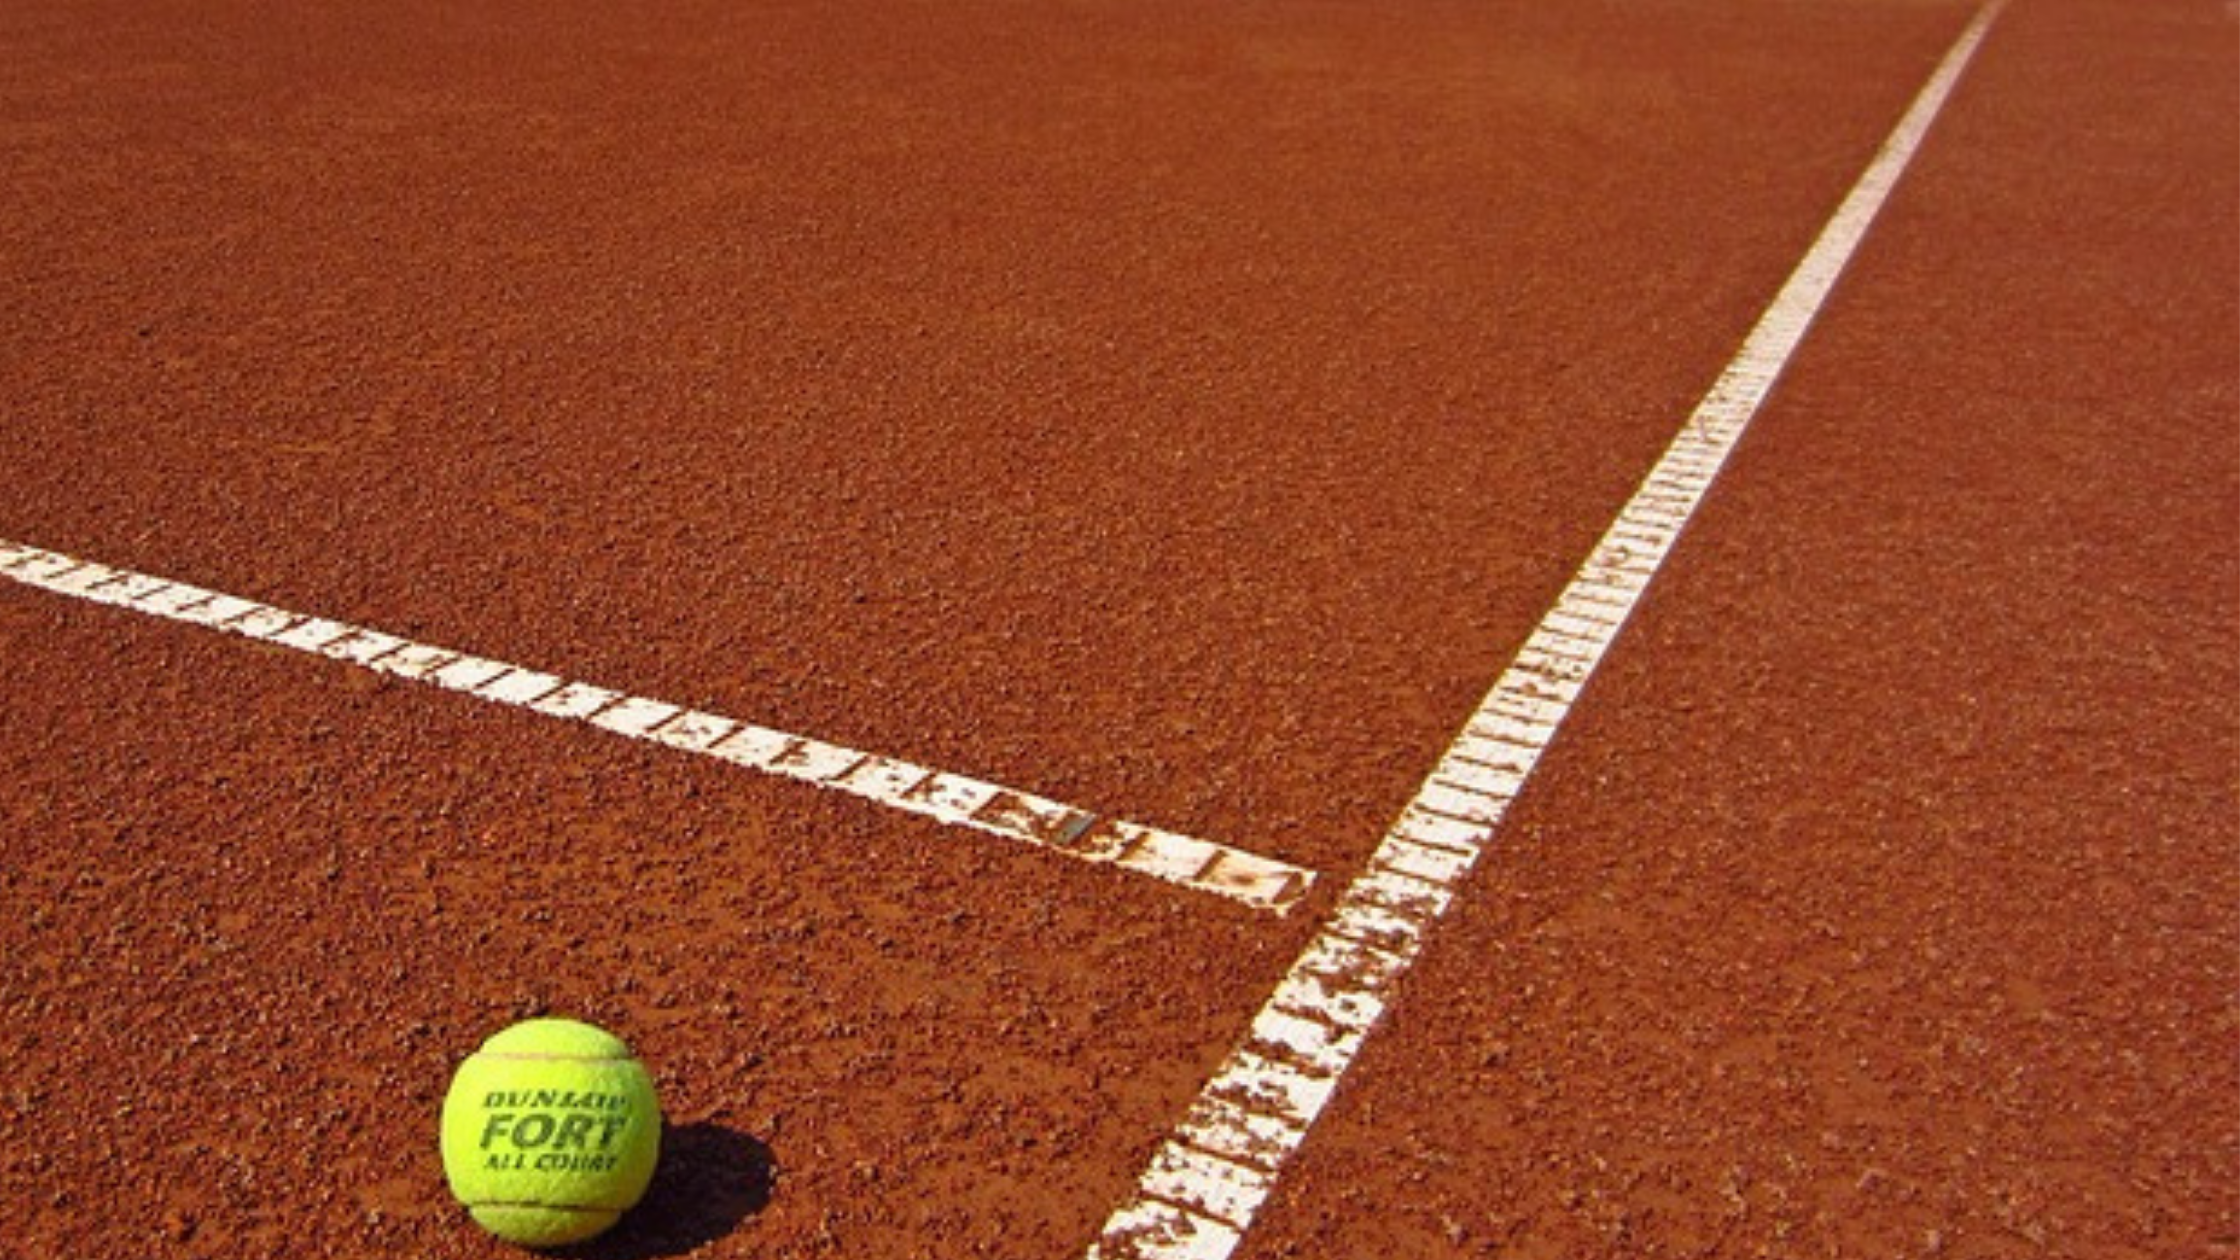 5 Things You Need To Play Tennis Safely, During The COVID19 Pandemic